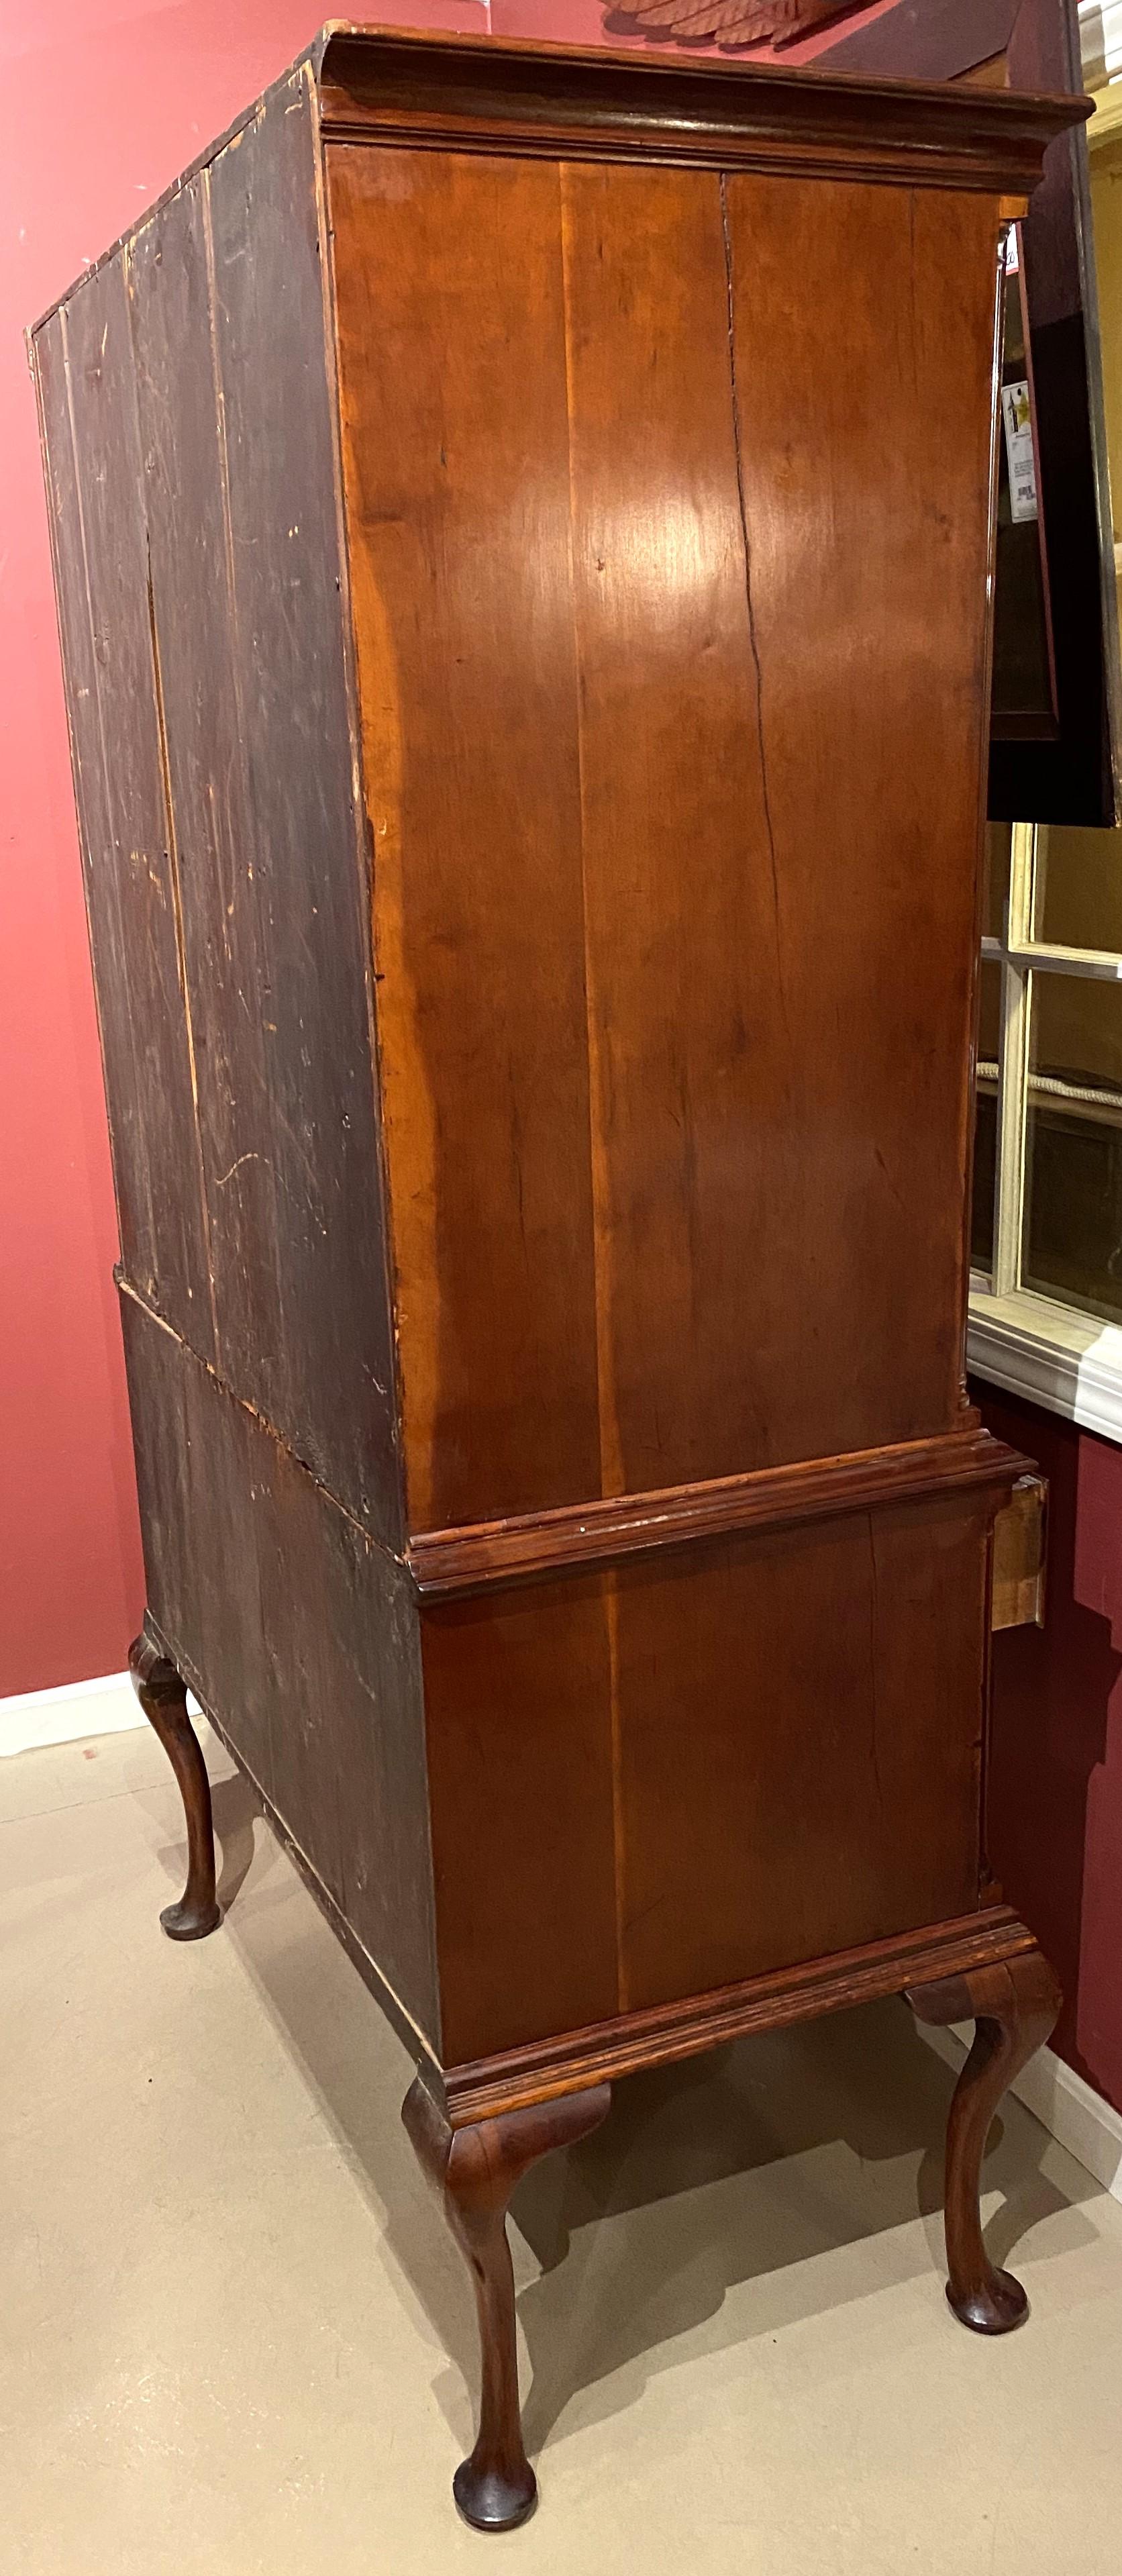 A fine two part Chippendale cherry highboy with a wonderful warm color and patina. The upper case with a molded cornice surmounting three small fitted top drawers over four graduated long drawers, each with period oval brasses, flanked by reeded